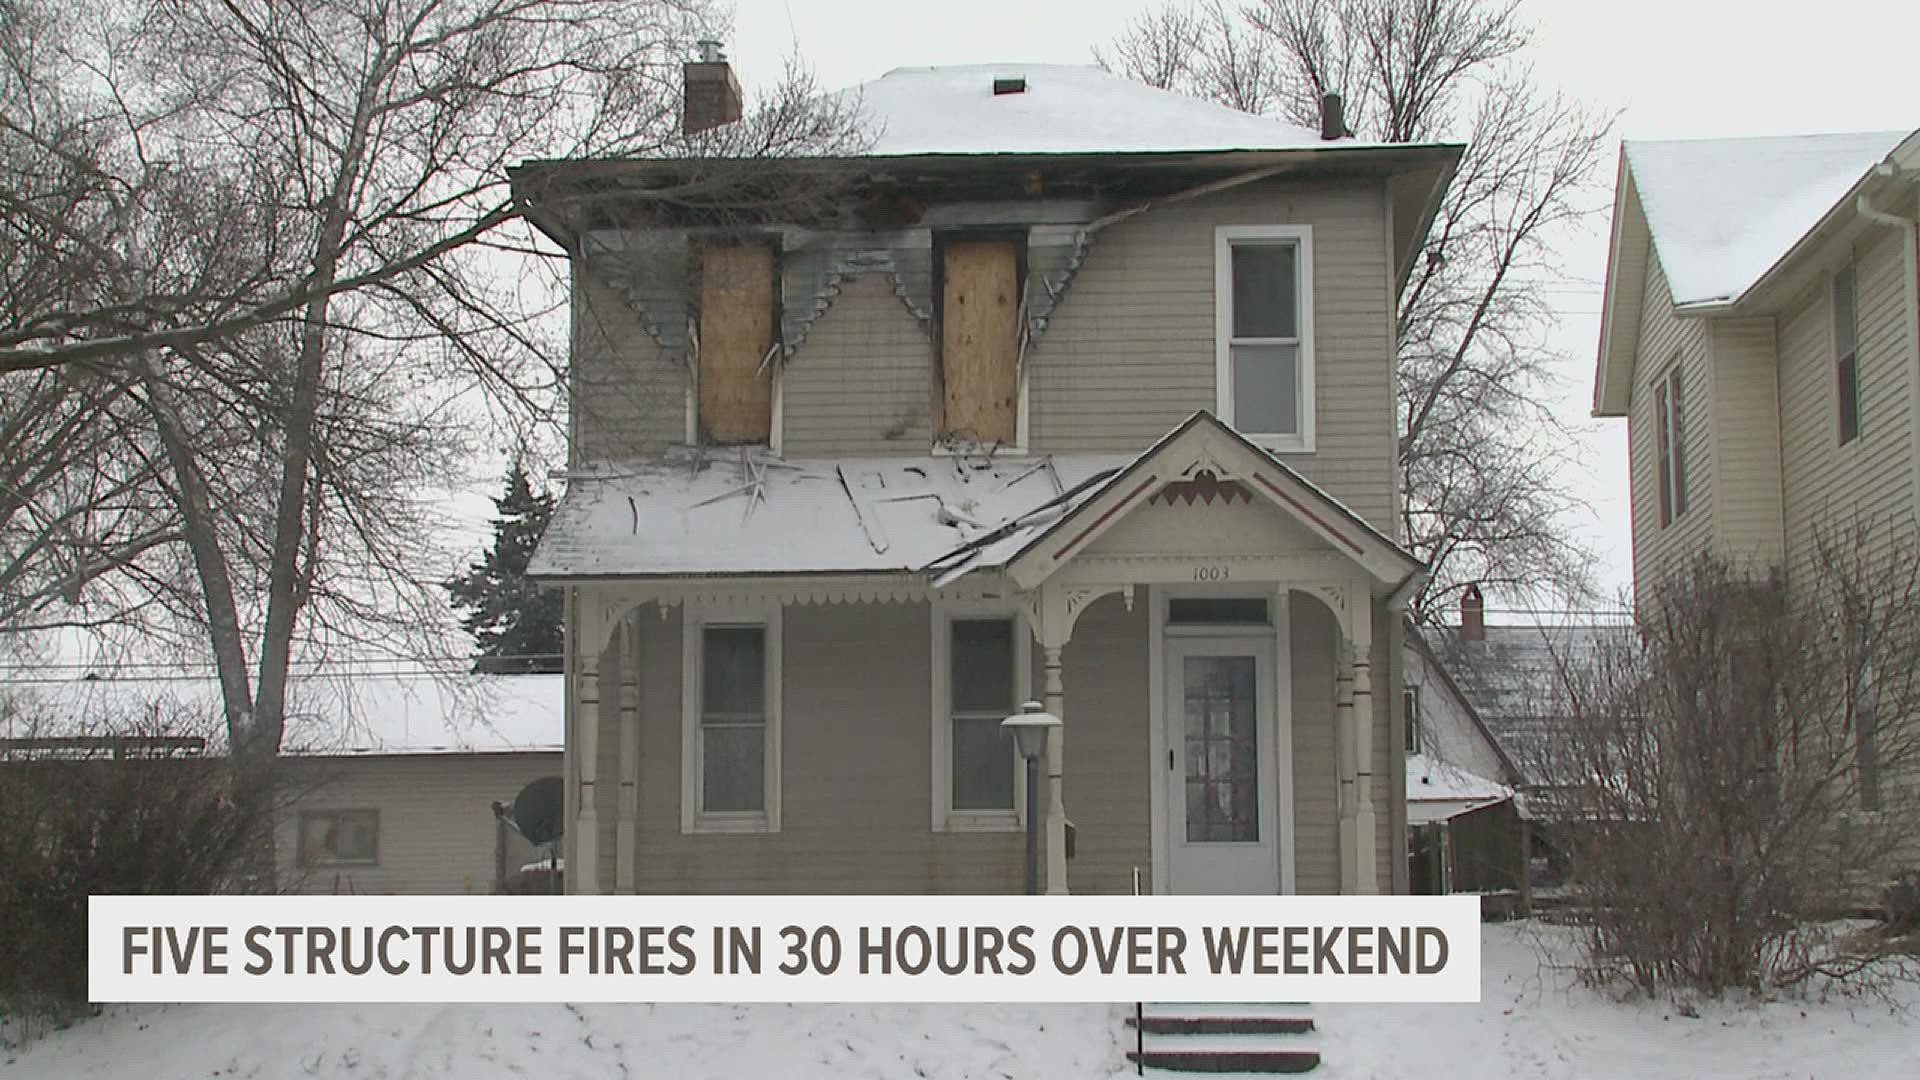 Four of the five residences did not have working smoke detectors according to the Burlington Fire Marshal.